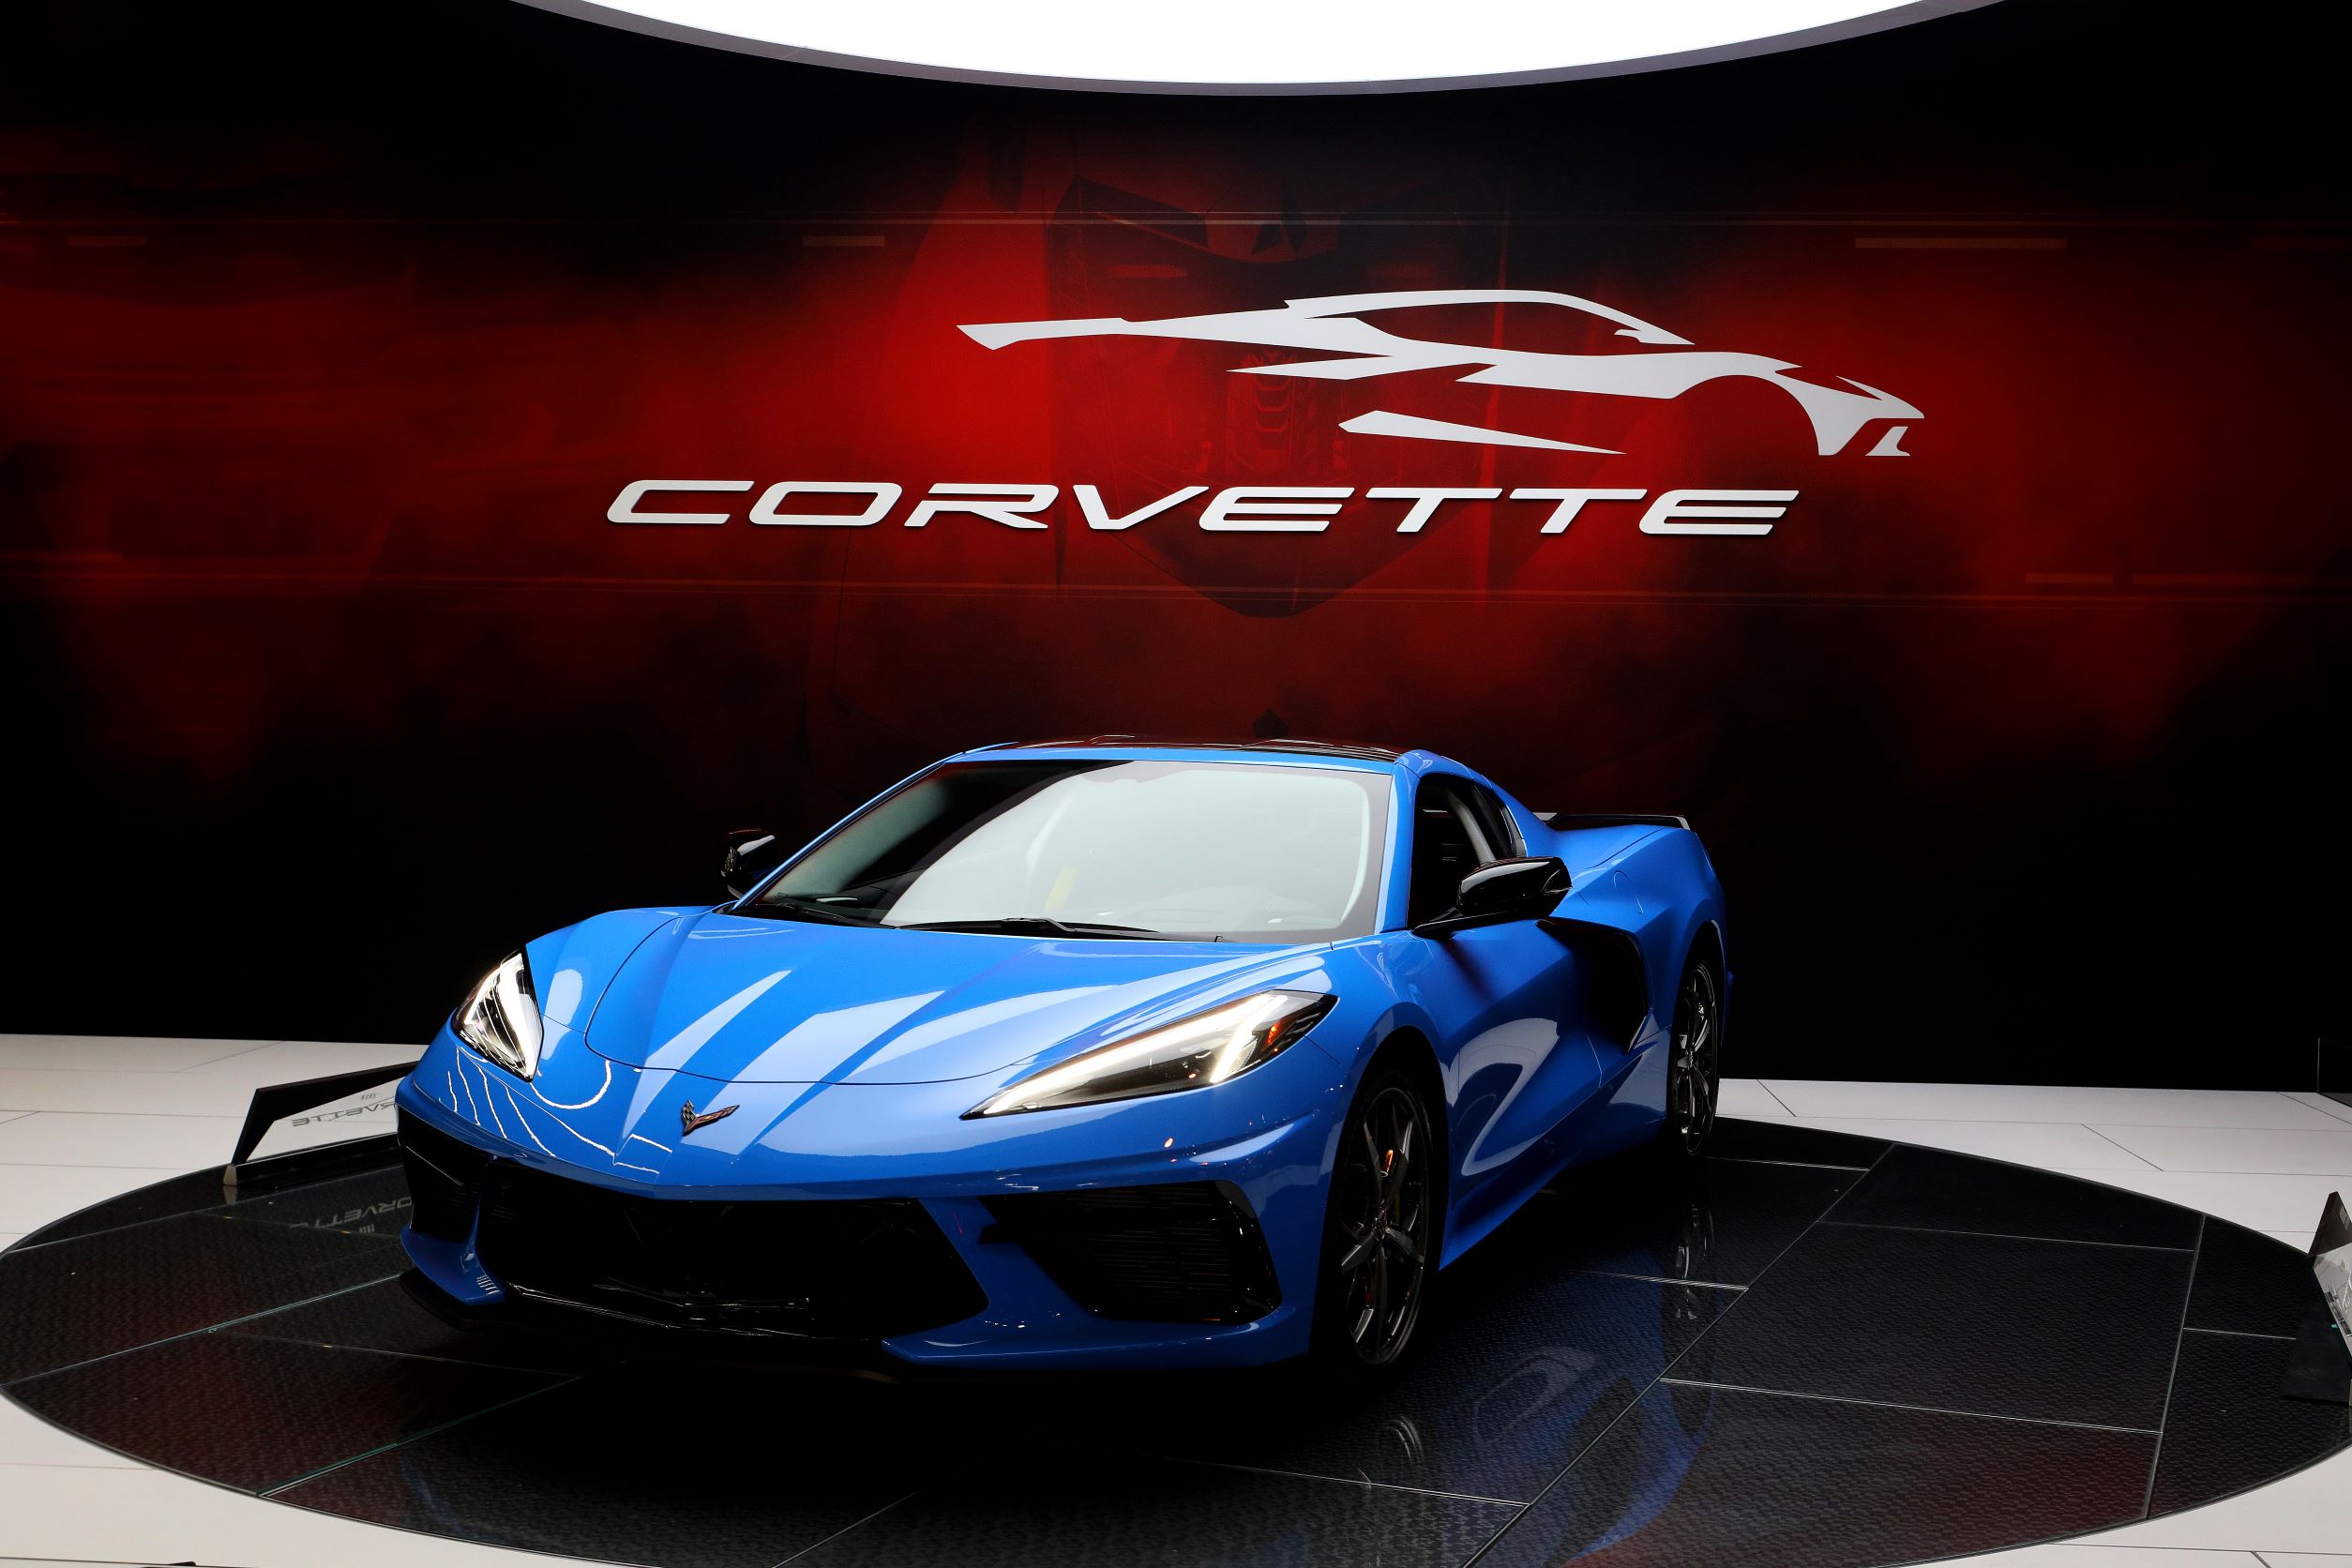 A blue Chevrolet Corvette sports car shot from the front 3/4